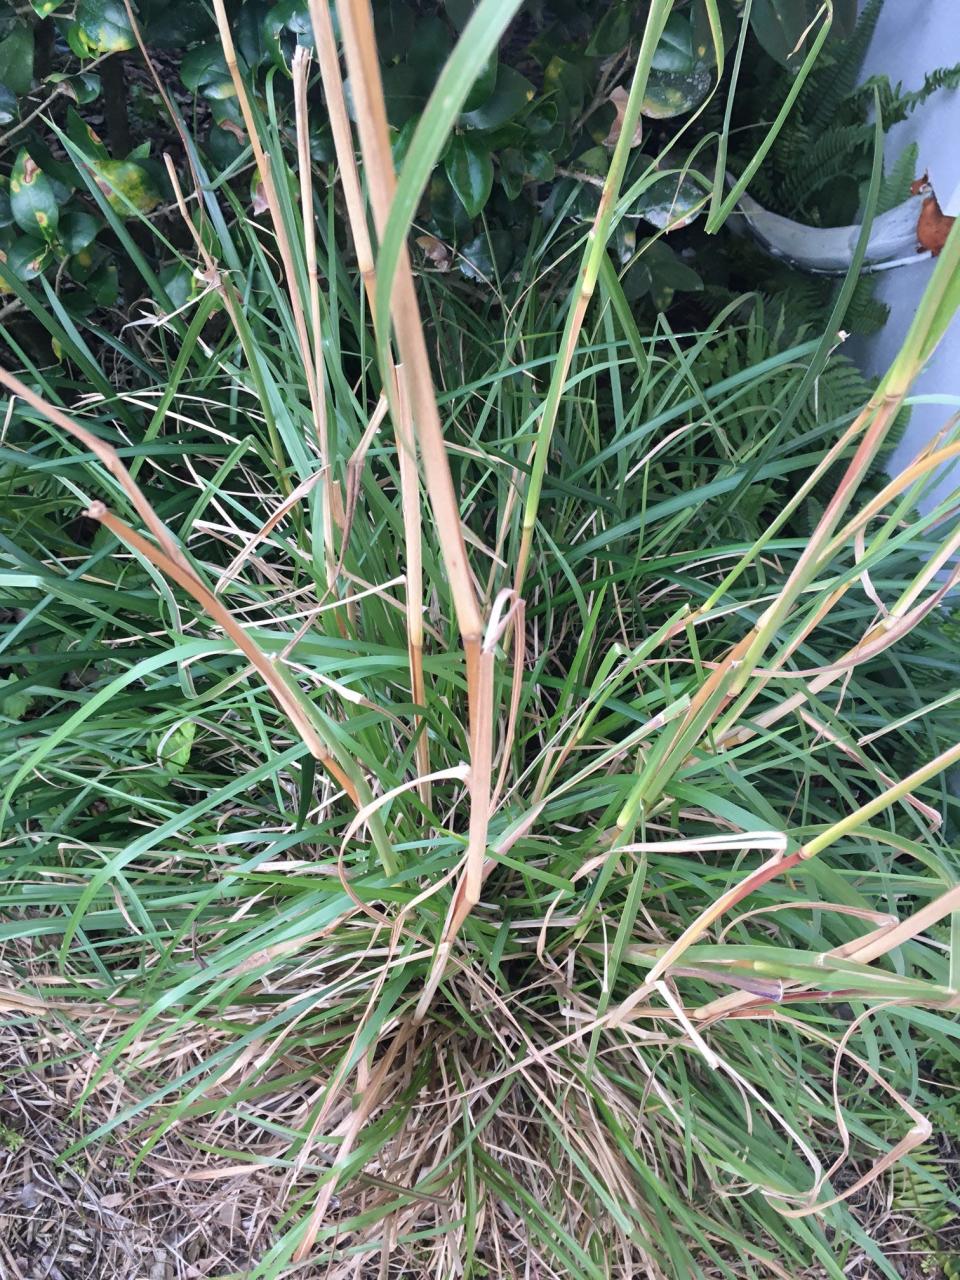 Broom-sedge grass is suited for pollinator and rain gardens and native meadows and upland plantings.